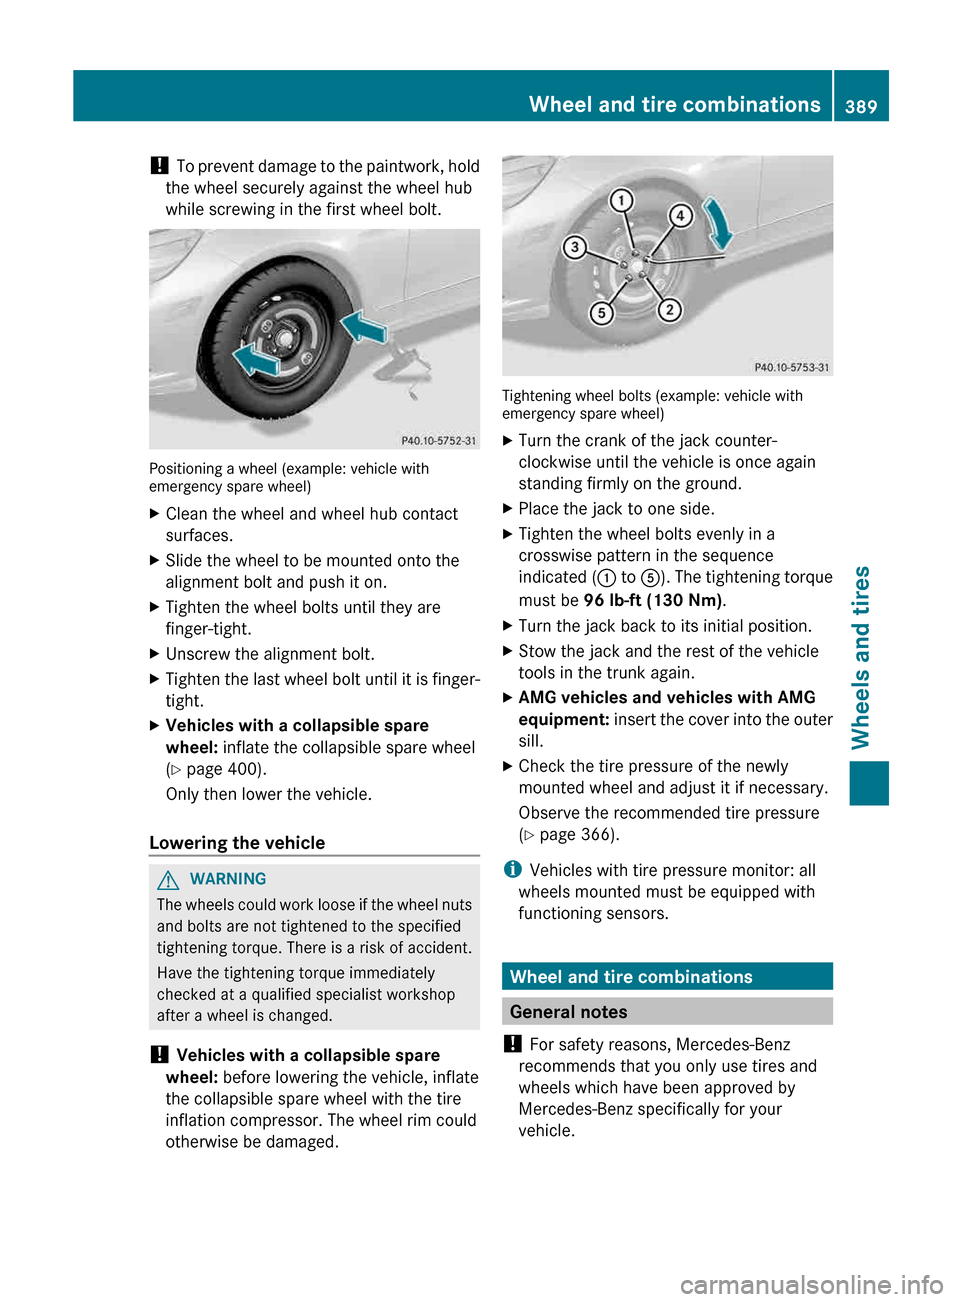 MERCEDES-BENZ E-Class SEDAN 2013 W212 Owners Manual ! 
To  prevent damage to the paintwork, hold
the wheel securely against the wheel hub
while screwing in the first wheel bolt. Positioning a wheel (example: vehicle with
emergency spare wheel)
X
Clean 